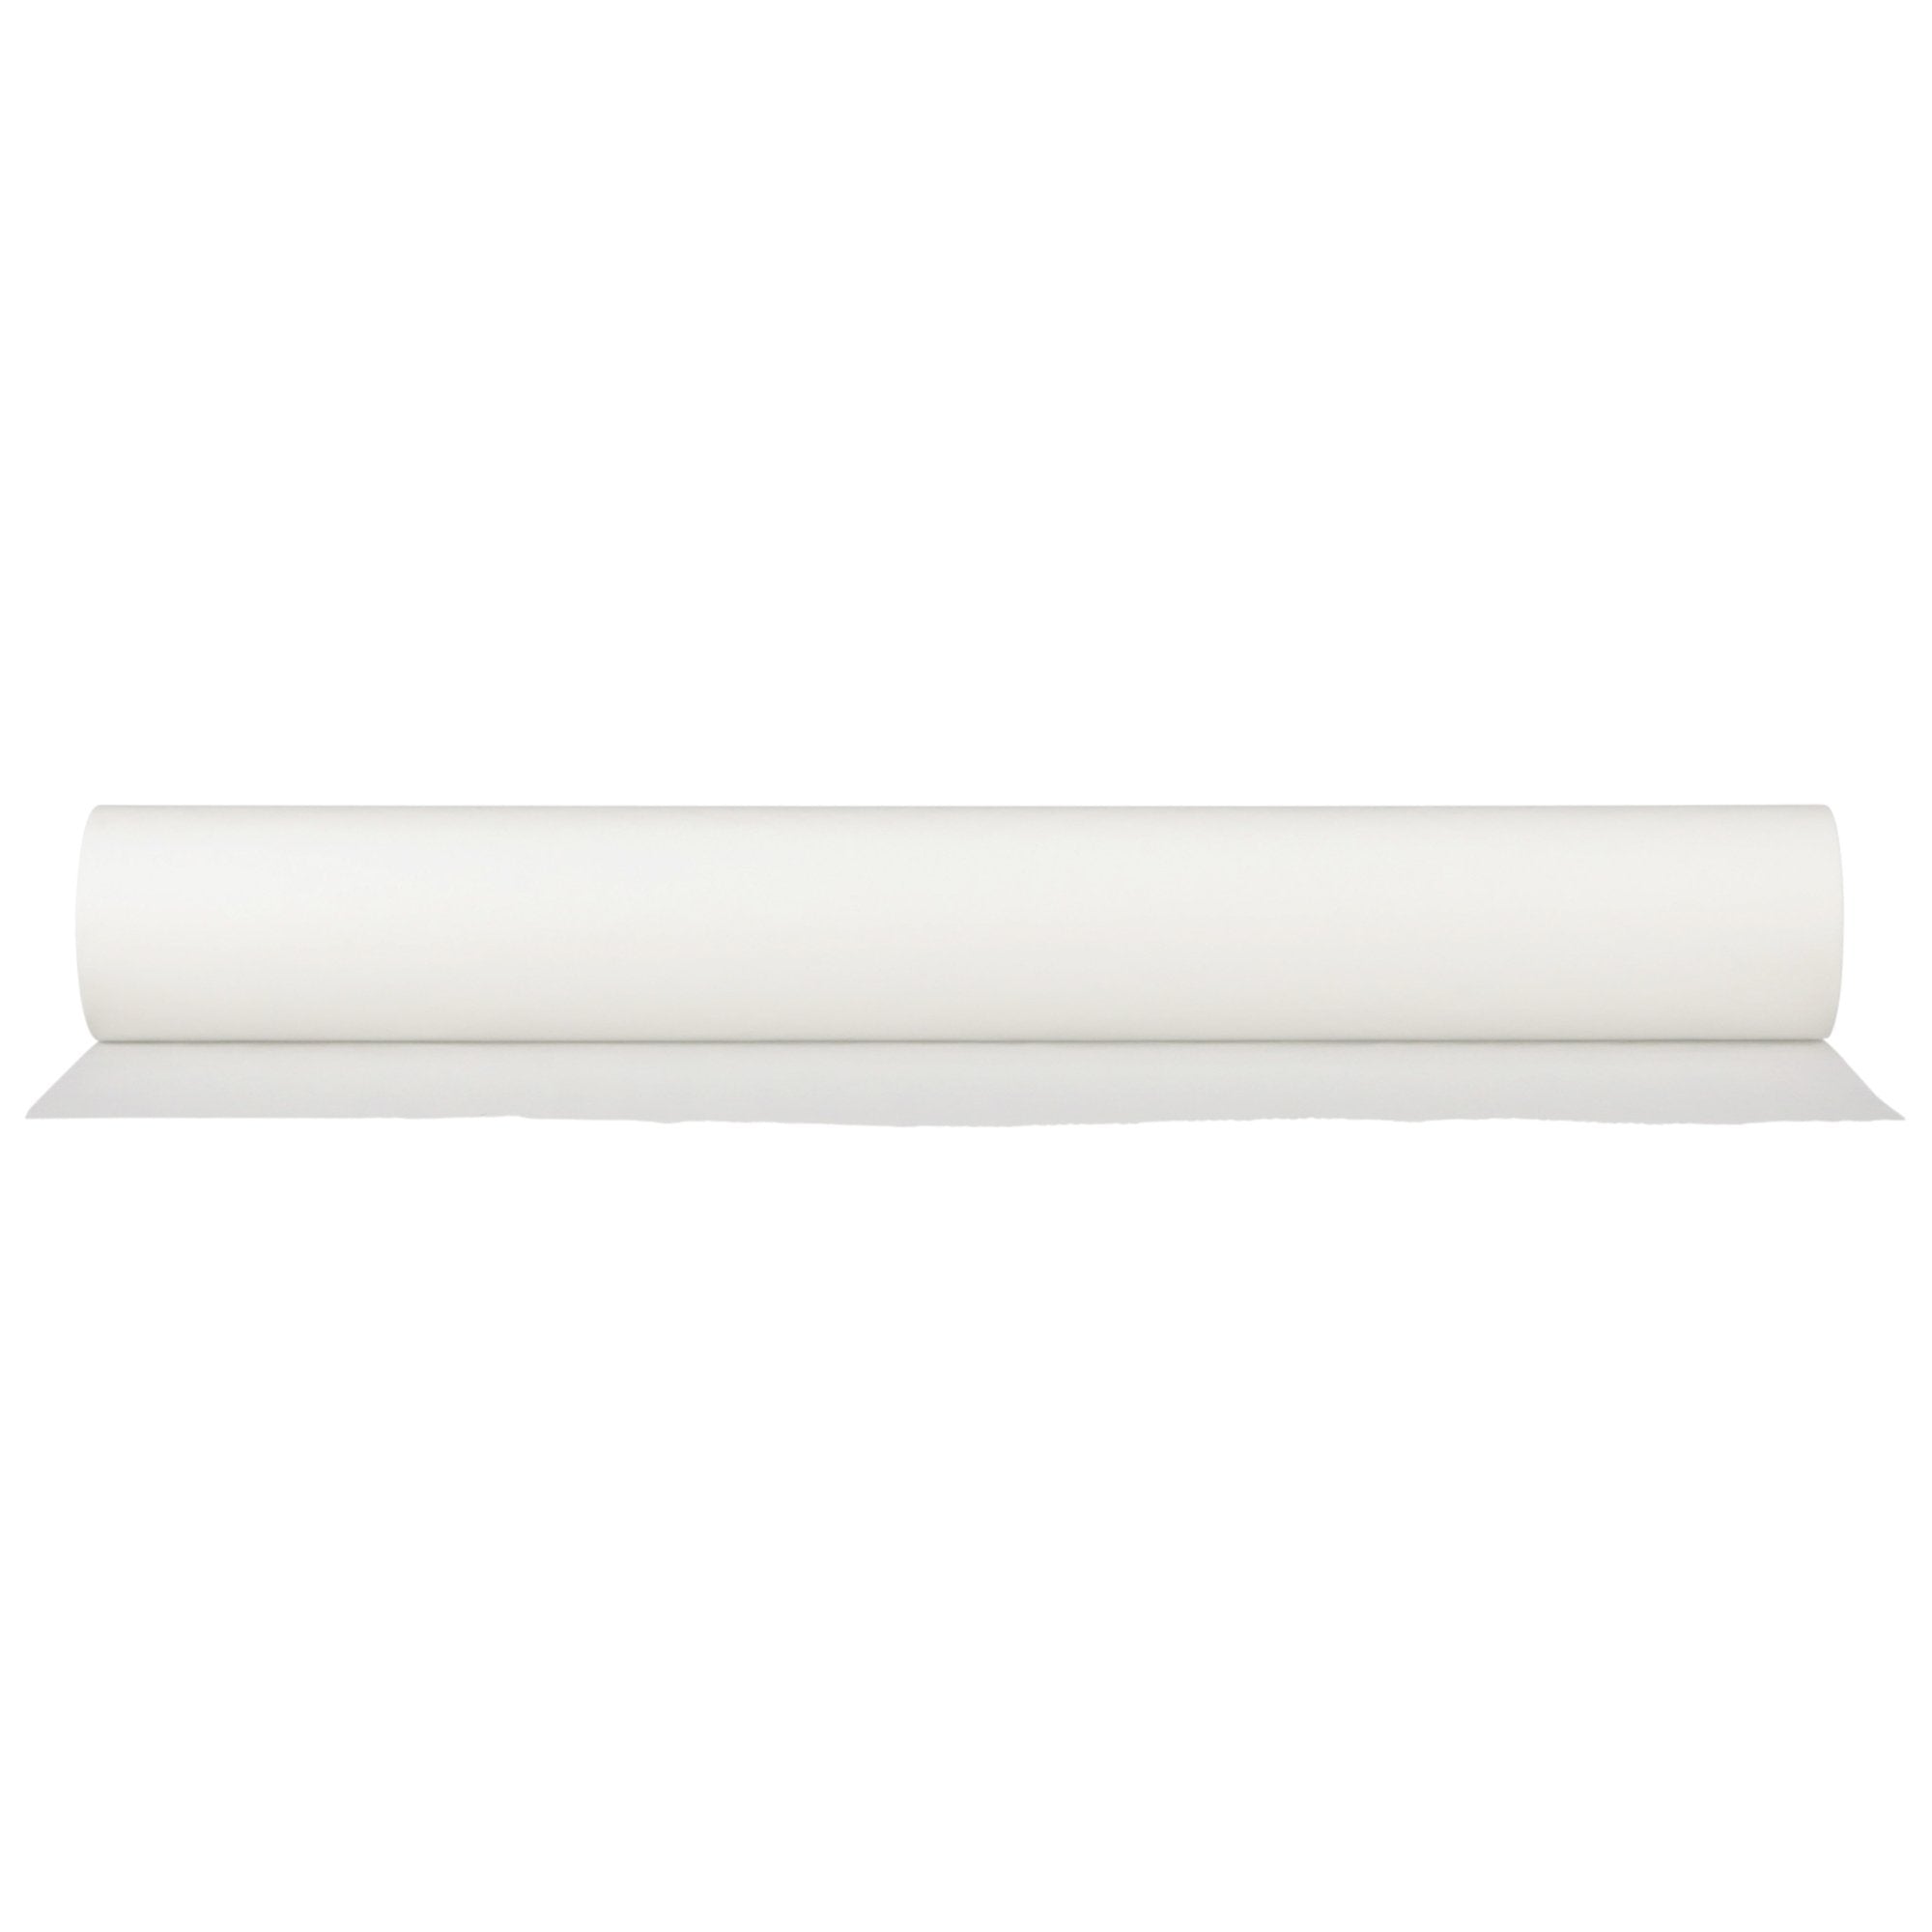 Table Paper McKesson 21 Inch Width White Smooth